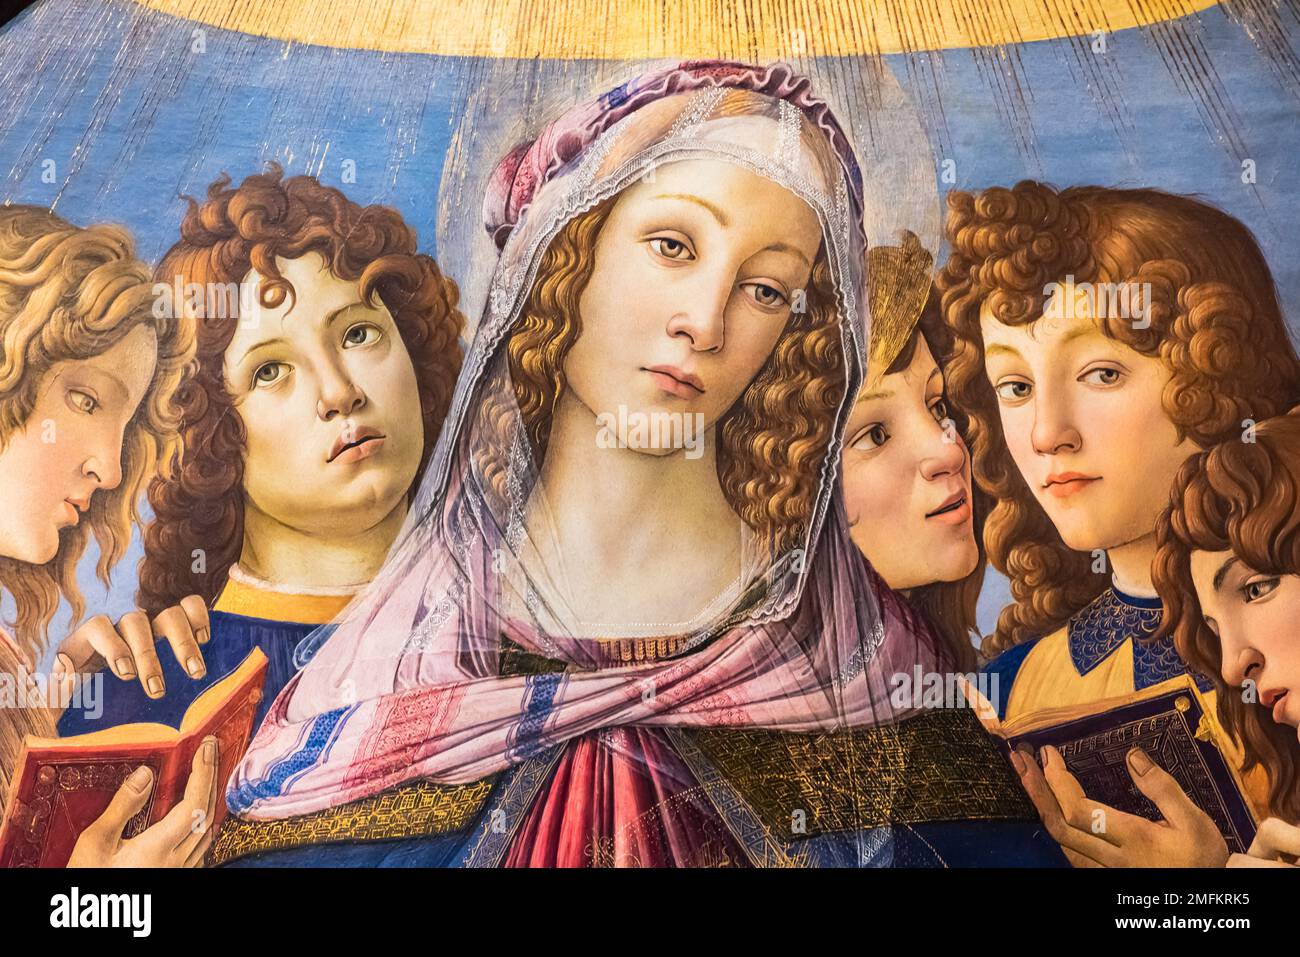 Detail of renaissance religious painting showing Virgin Mary surrounded by a group of boys Stock Photo